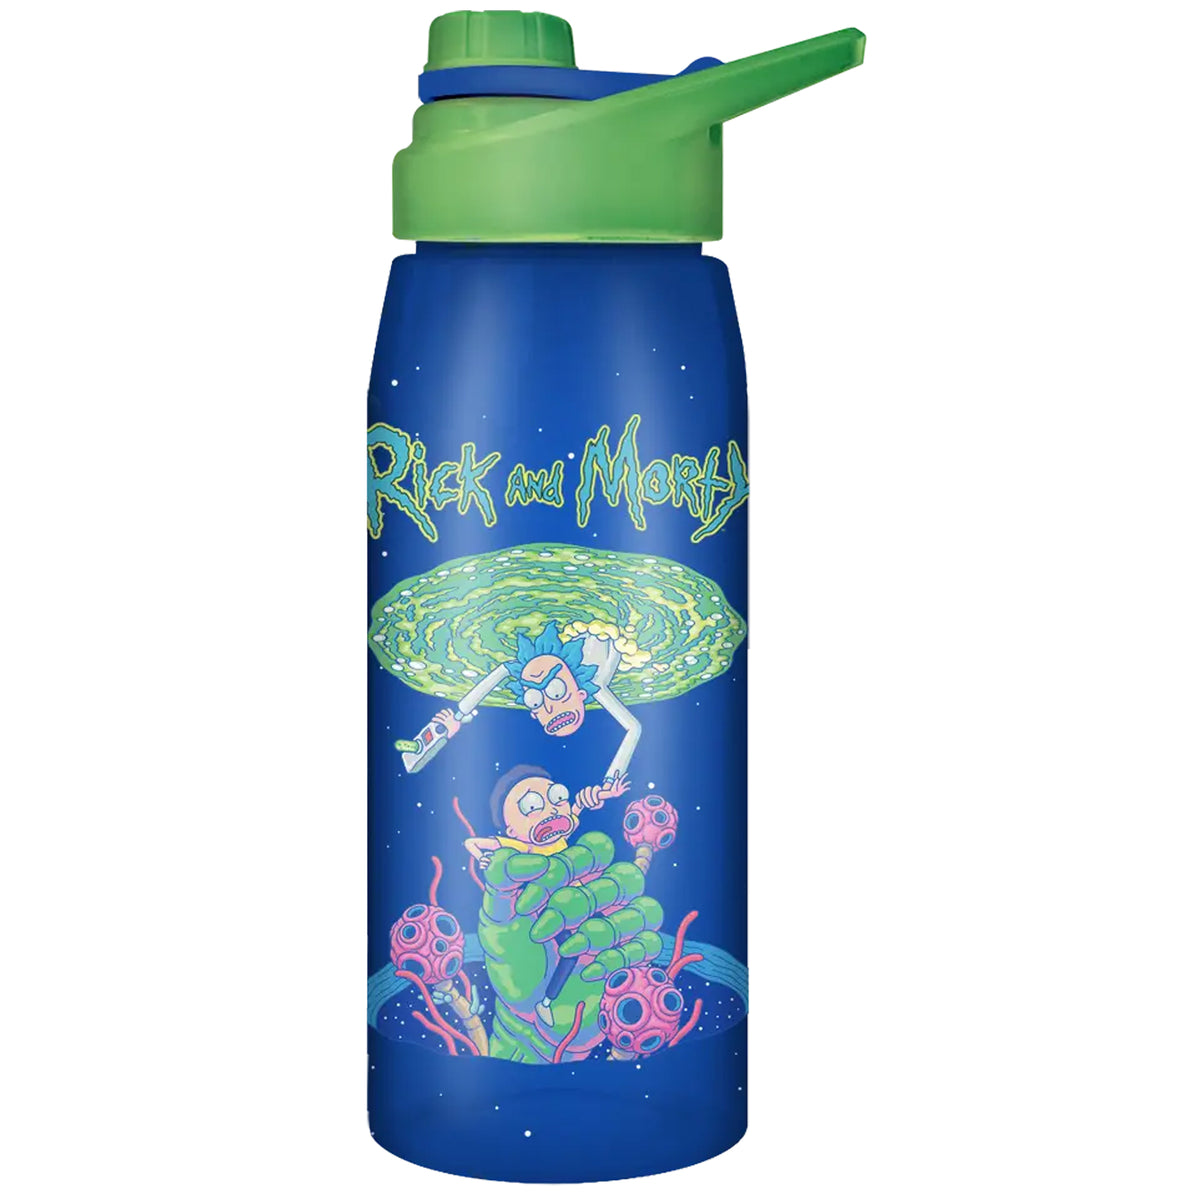 Rick and Morty Portal 28oz Water Bottle